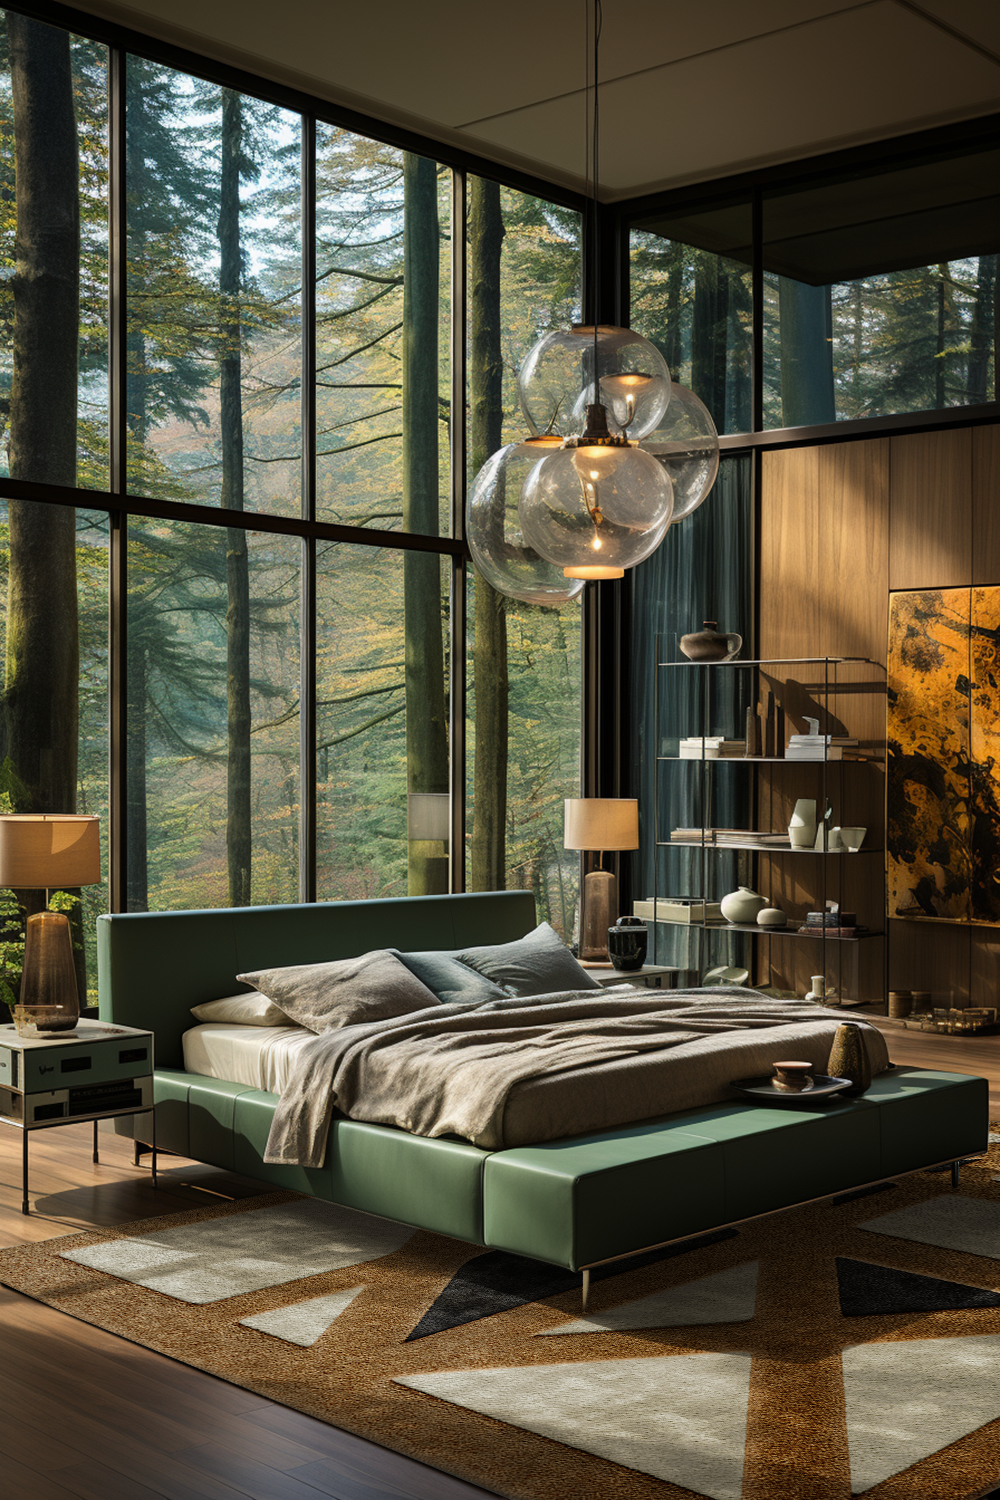 A modern bedroom with large glass windows and green bedroom.